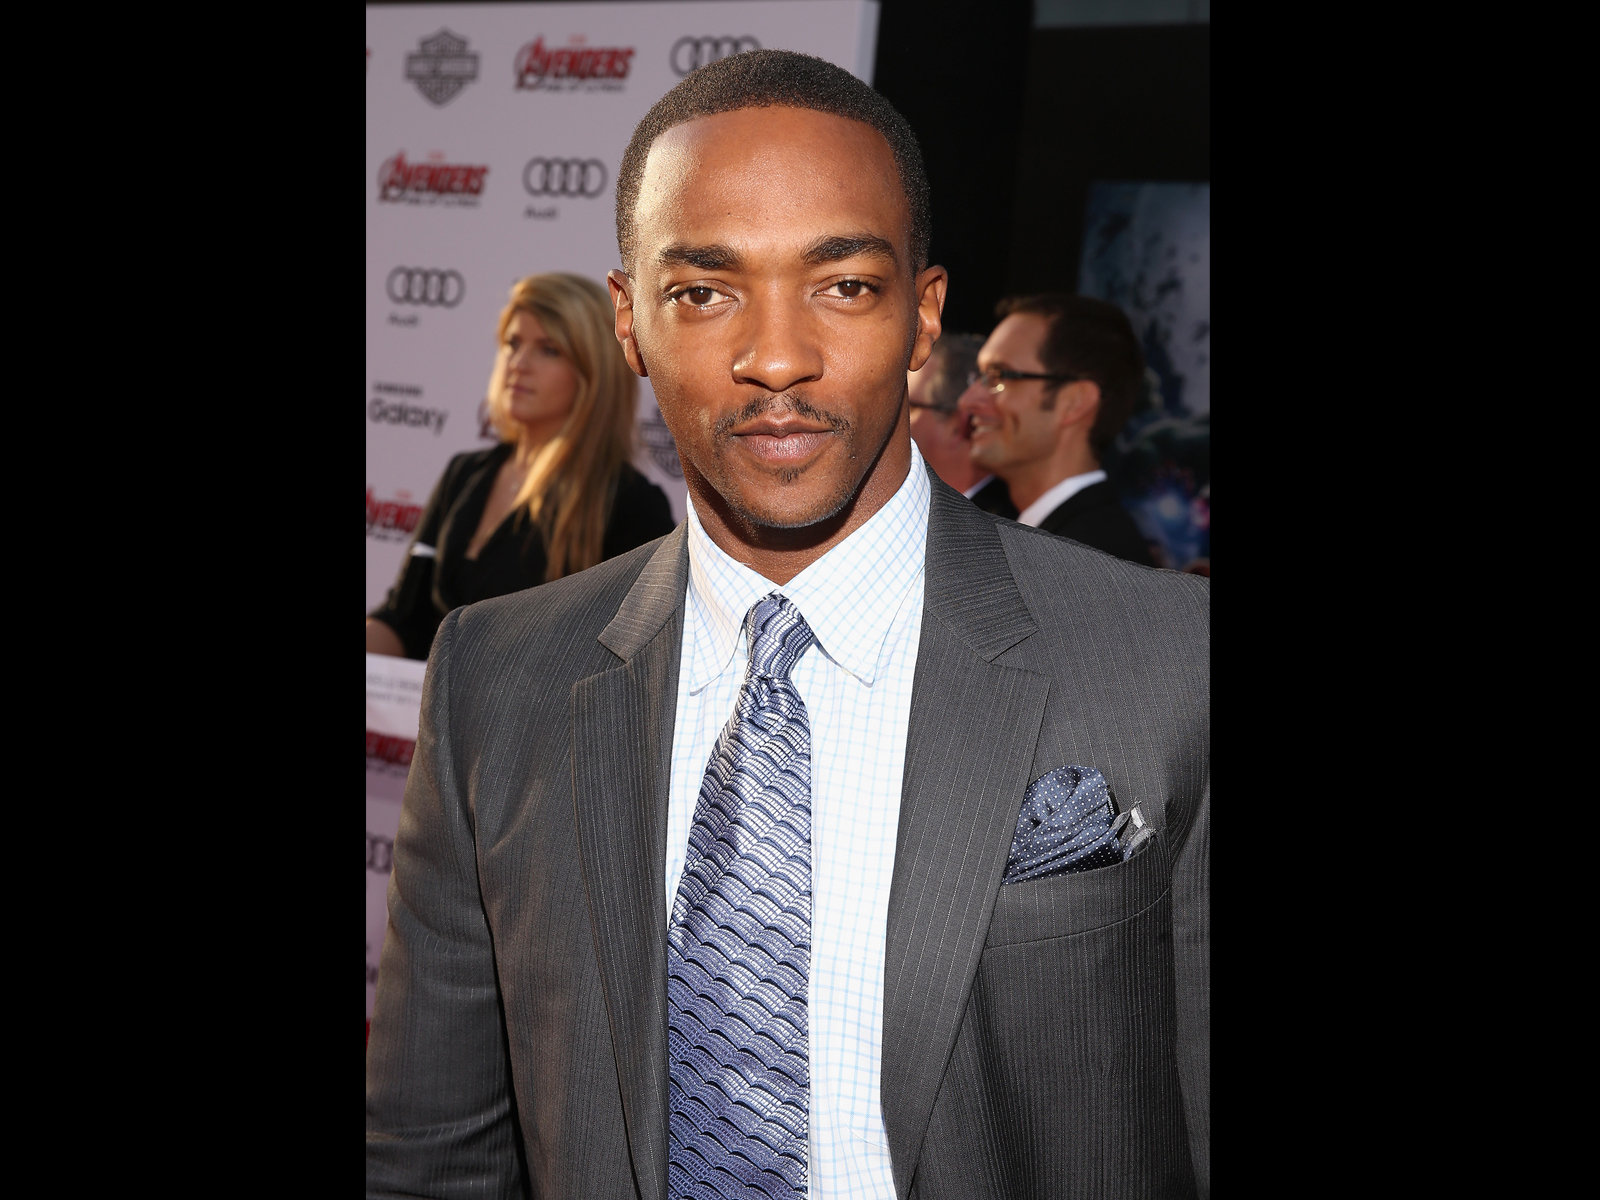 02-anthony-mackie-gettyimages-469648142.jpg